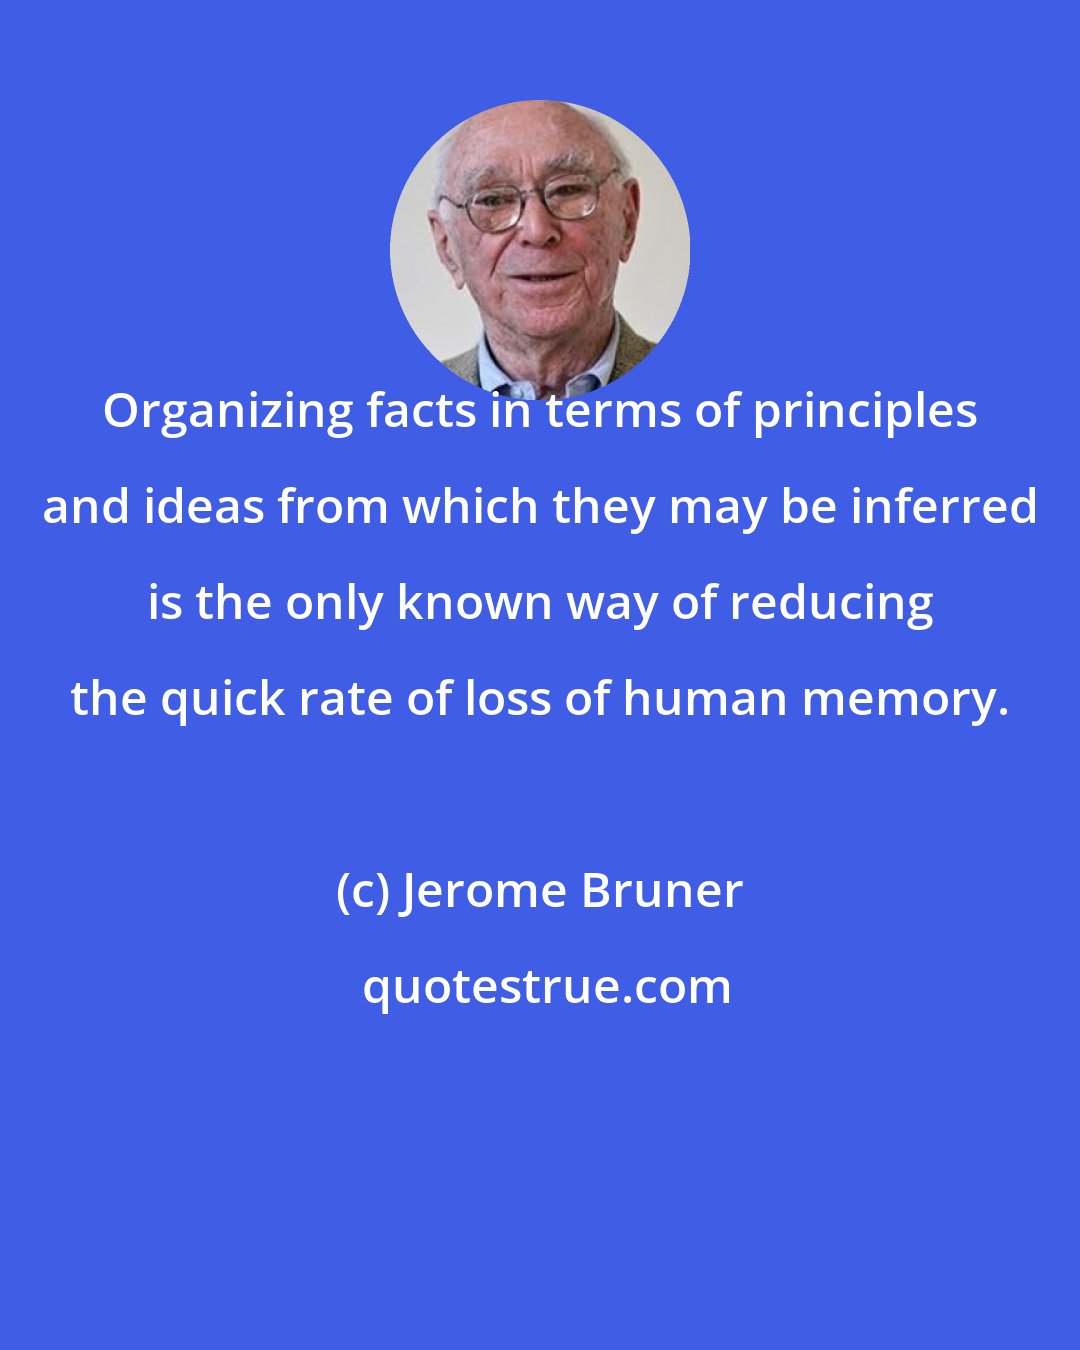 Jerome Bruner: Organizing facts in terms of principles and ideas from which they may be inferred is the only known way of reducing the quick rate of loss of human memory.